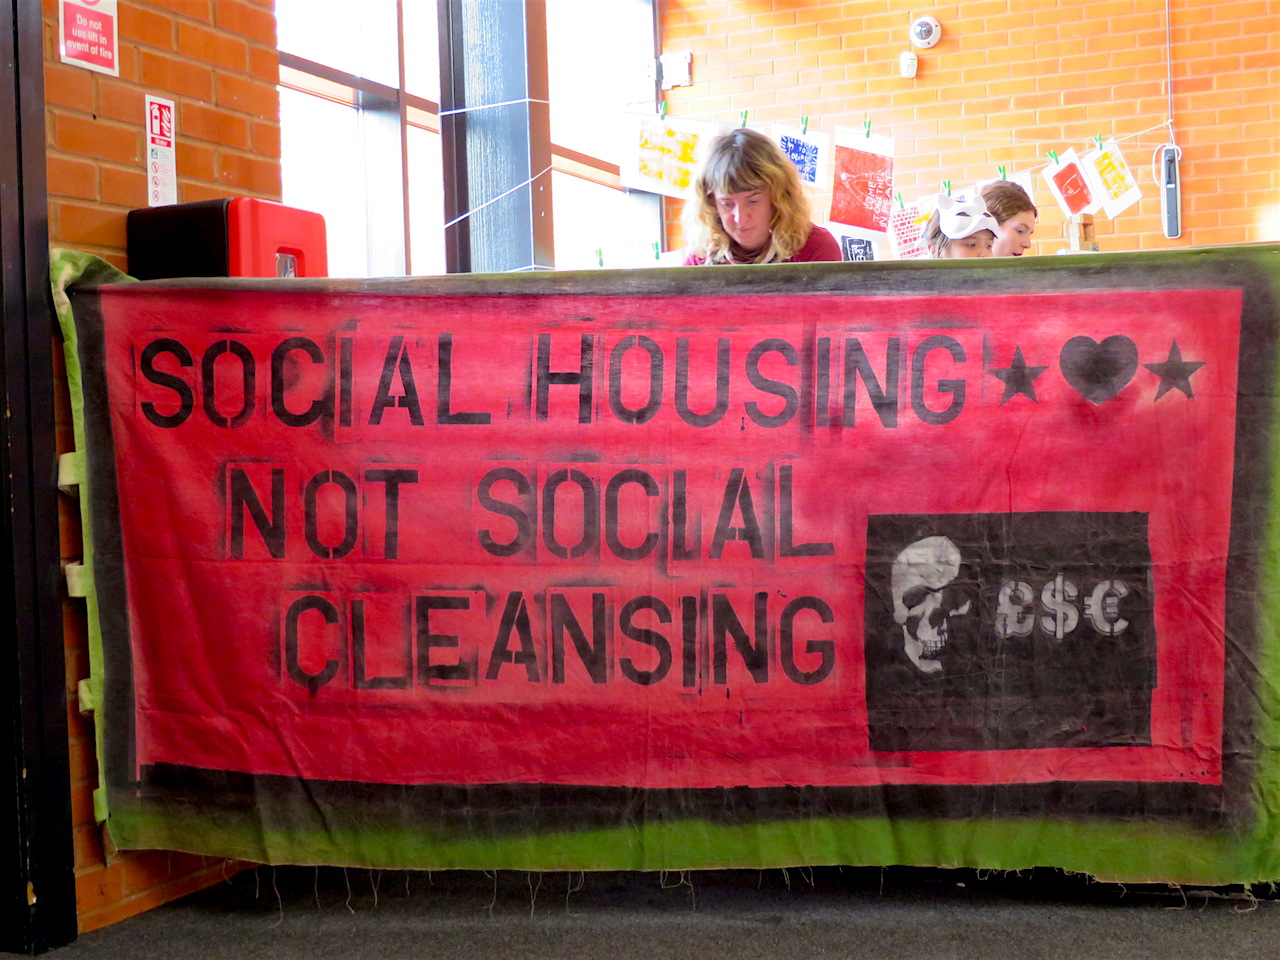 A banner in defence of social housing at the Anarchist Bookfair in Tottenham on October 28, 2017 (Photo: Andy Worthington).